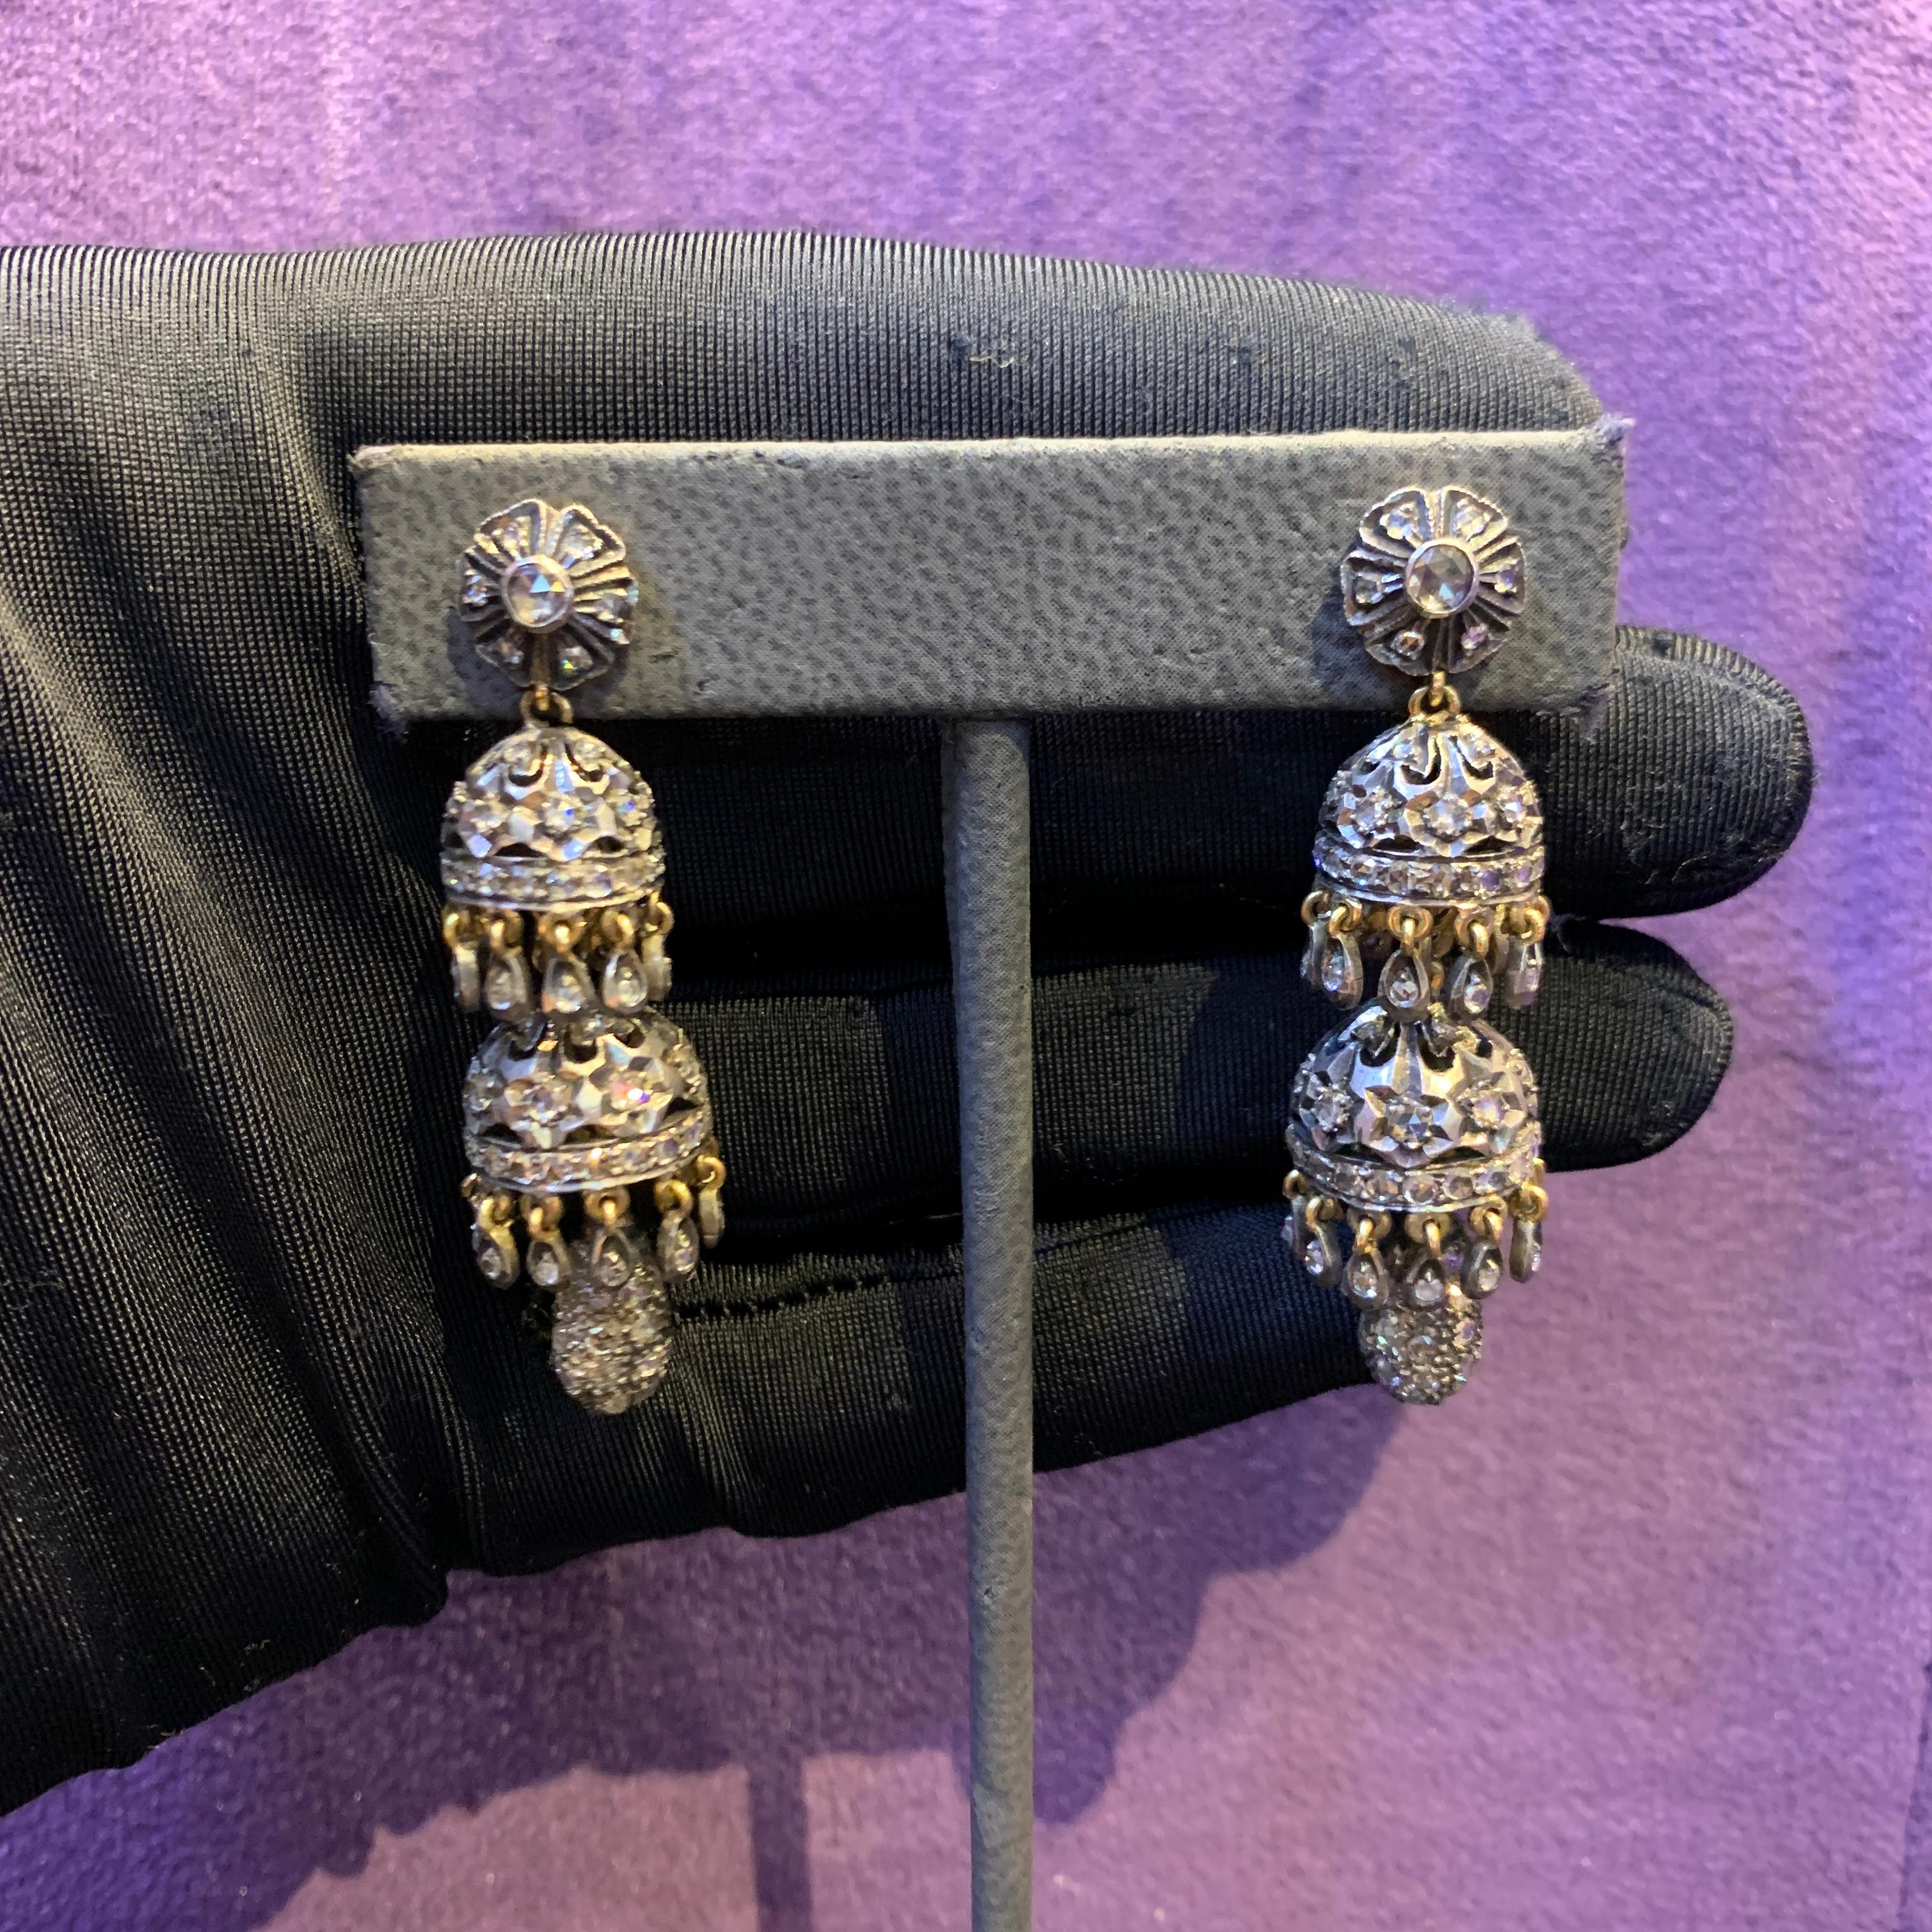 Diamond Chandelier Earrings

A pair of 18 karat gold and silver earrings set with 216 rose cut diamonds weighing approximately 2.2 carats

Length: 2